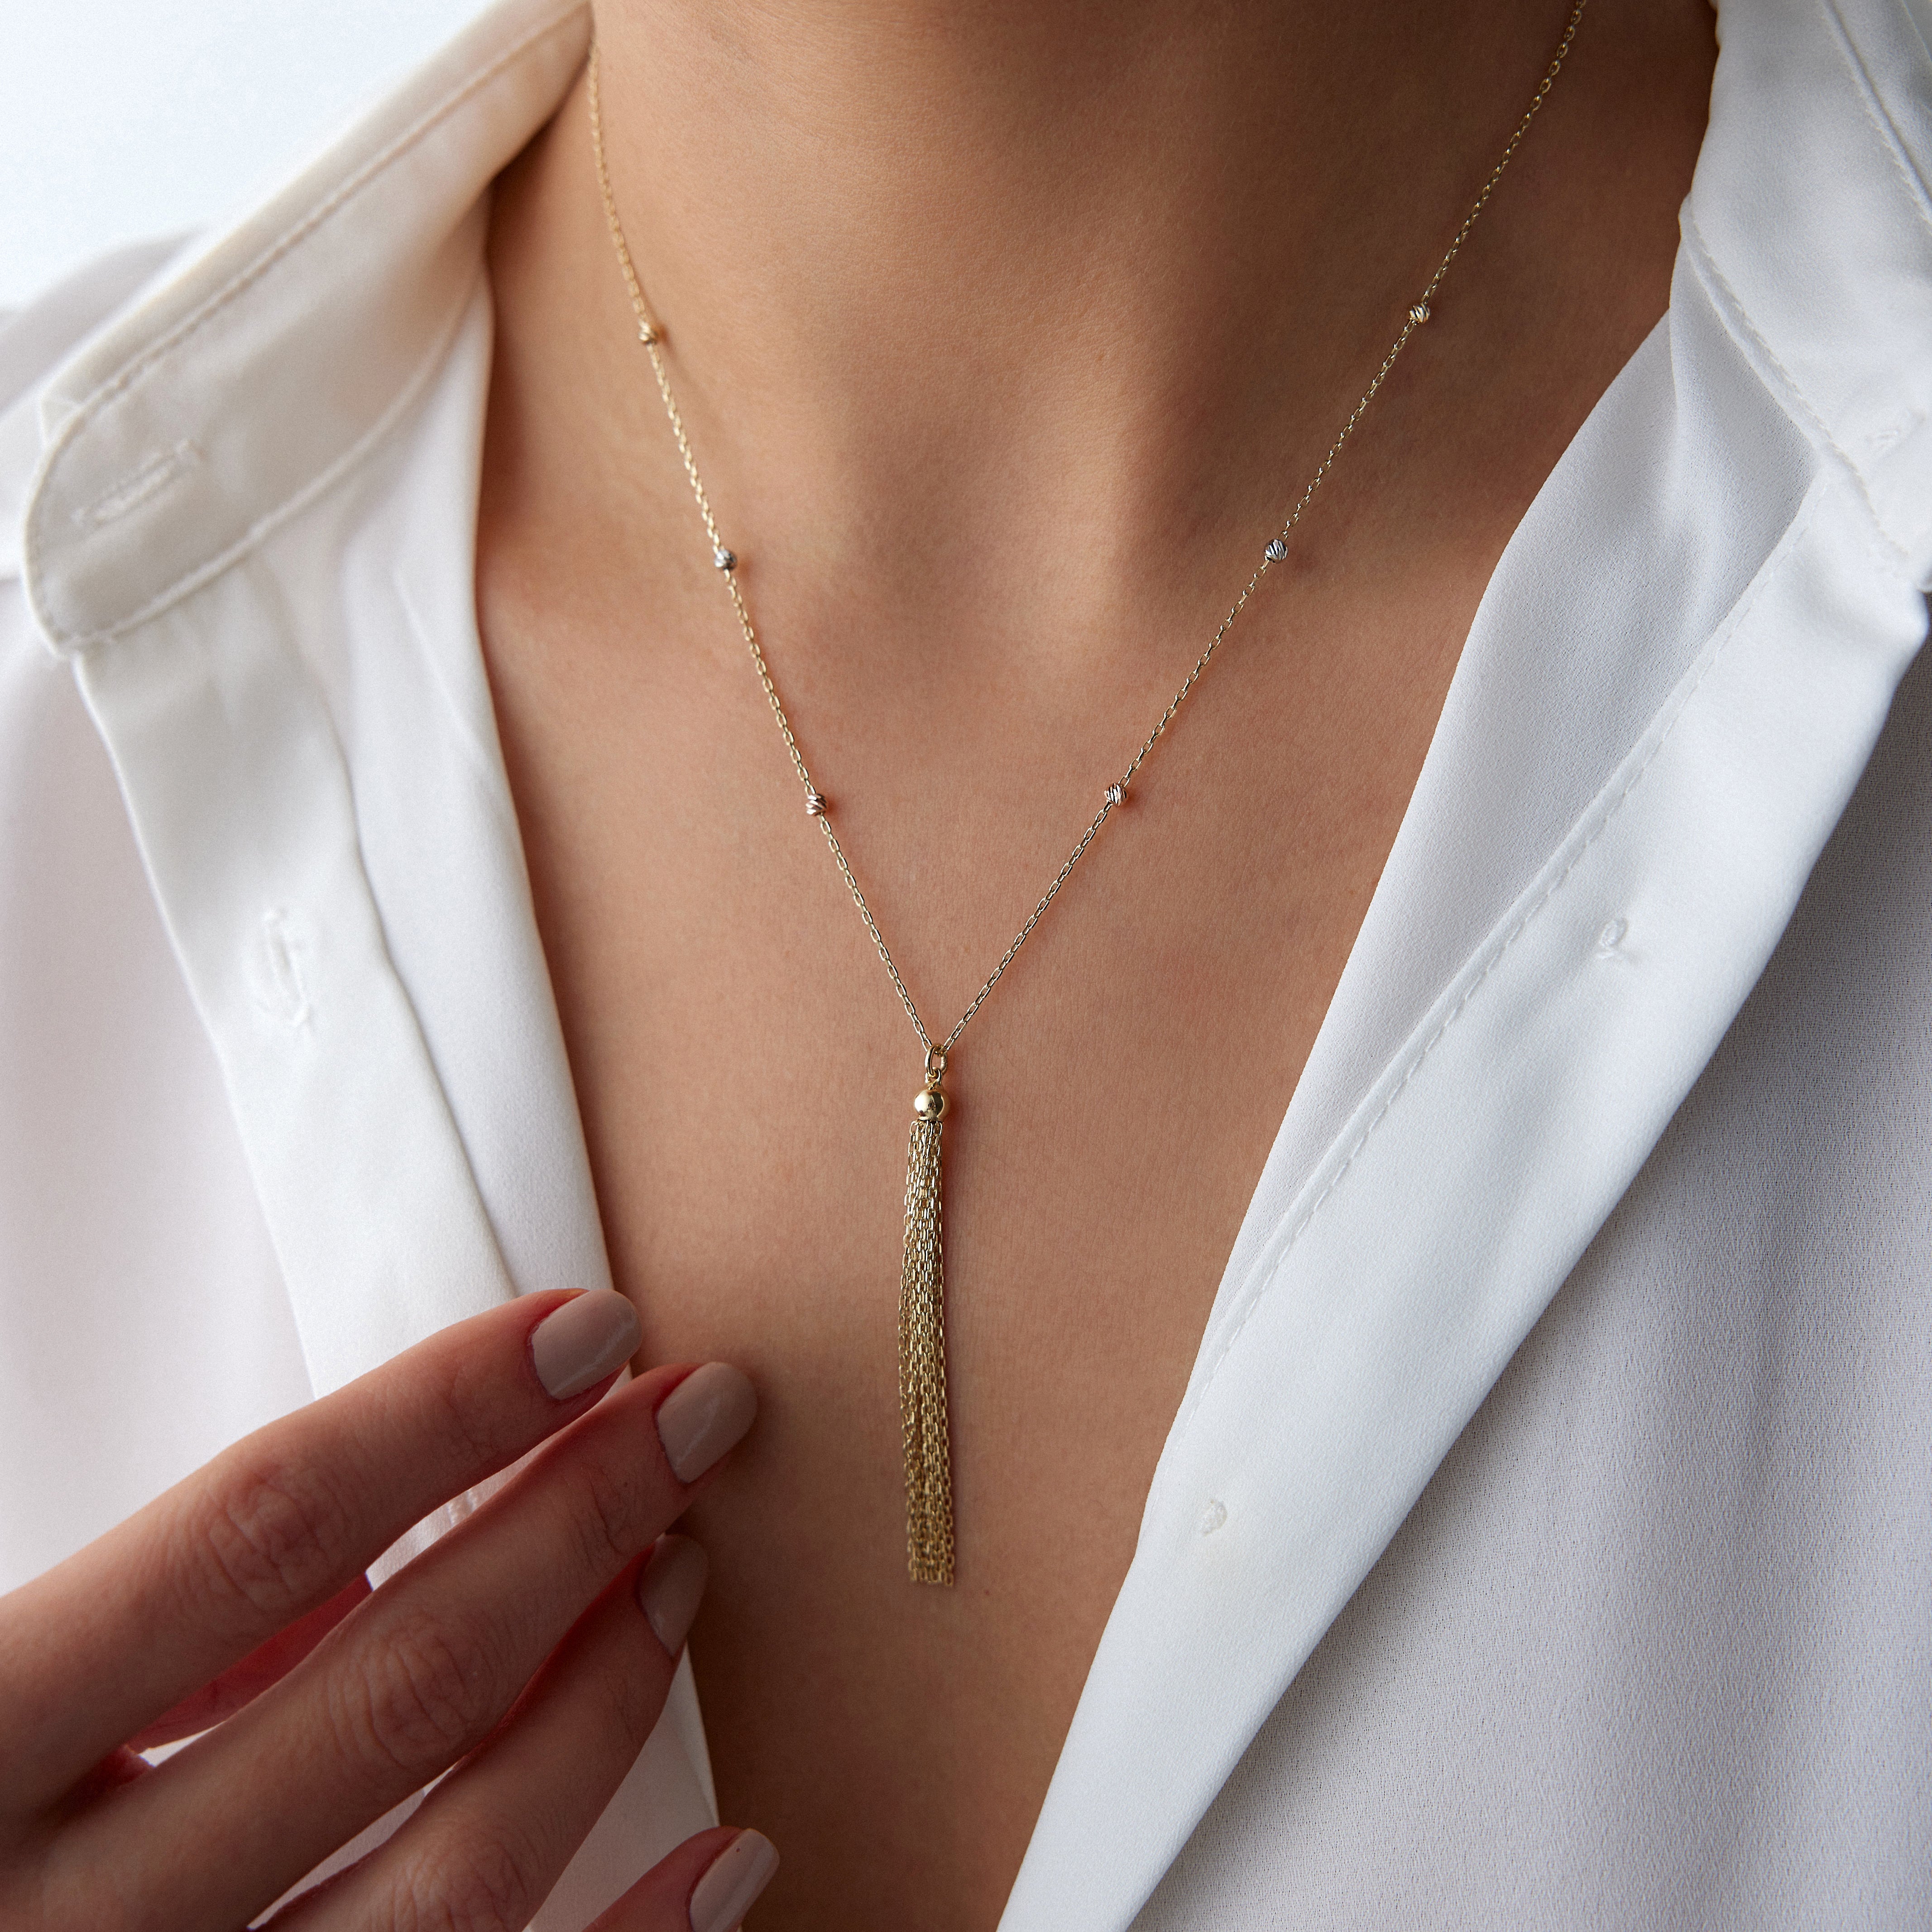 Gold Chain Tassel Necklace in 14K Gold